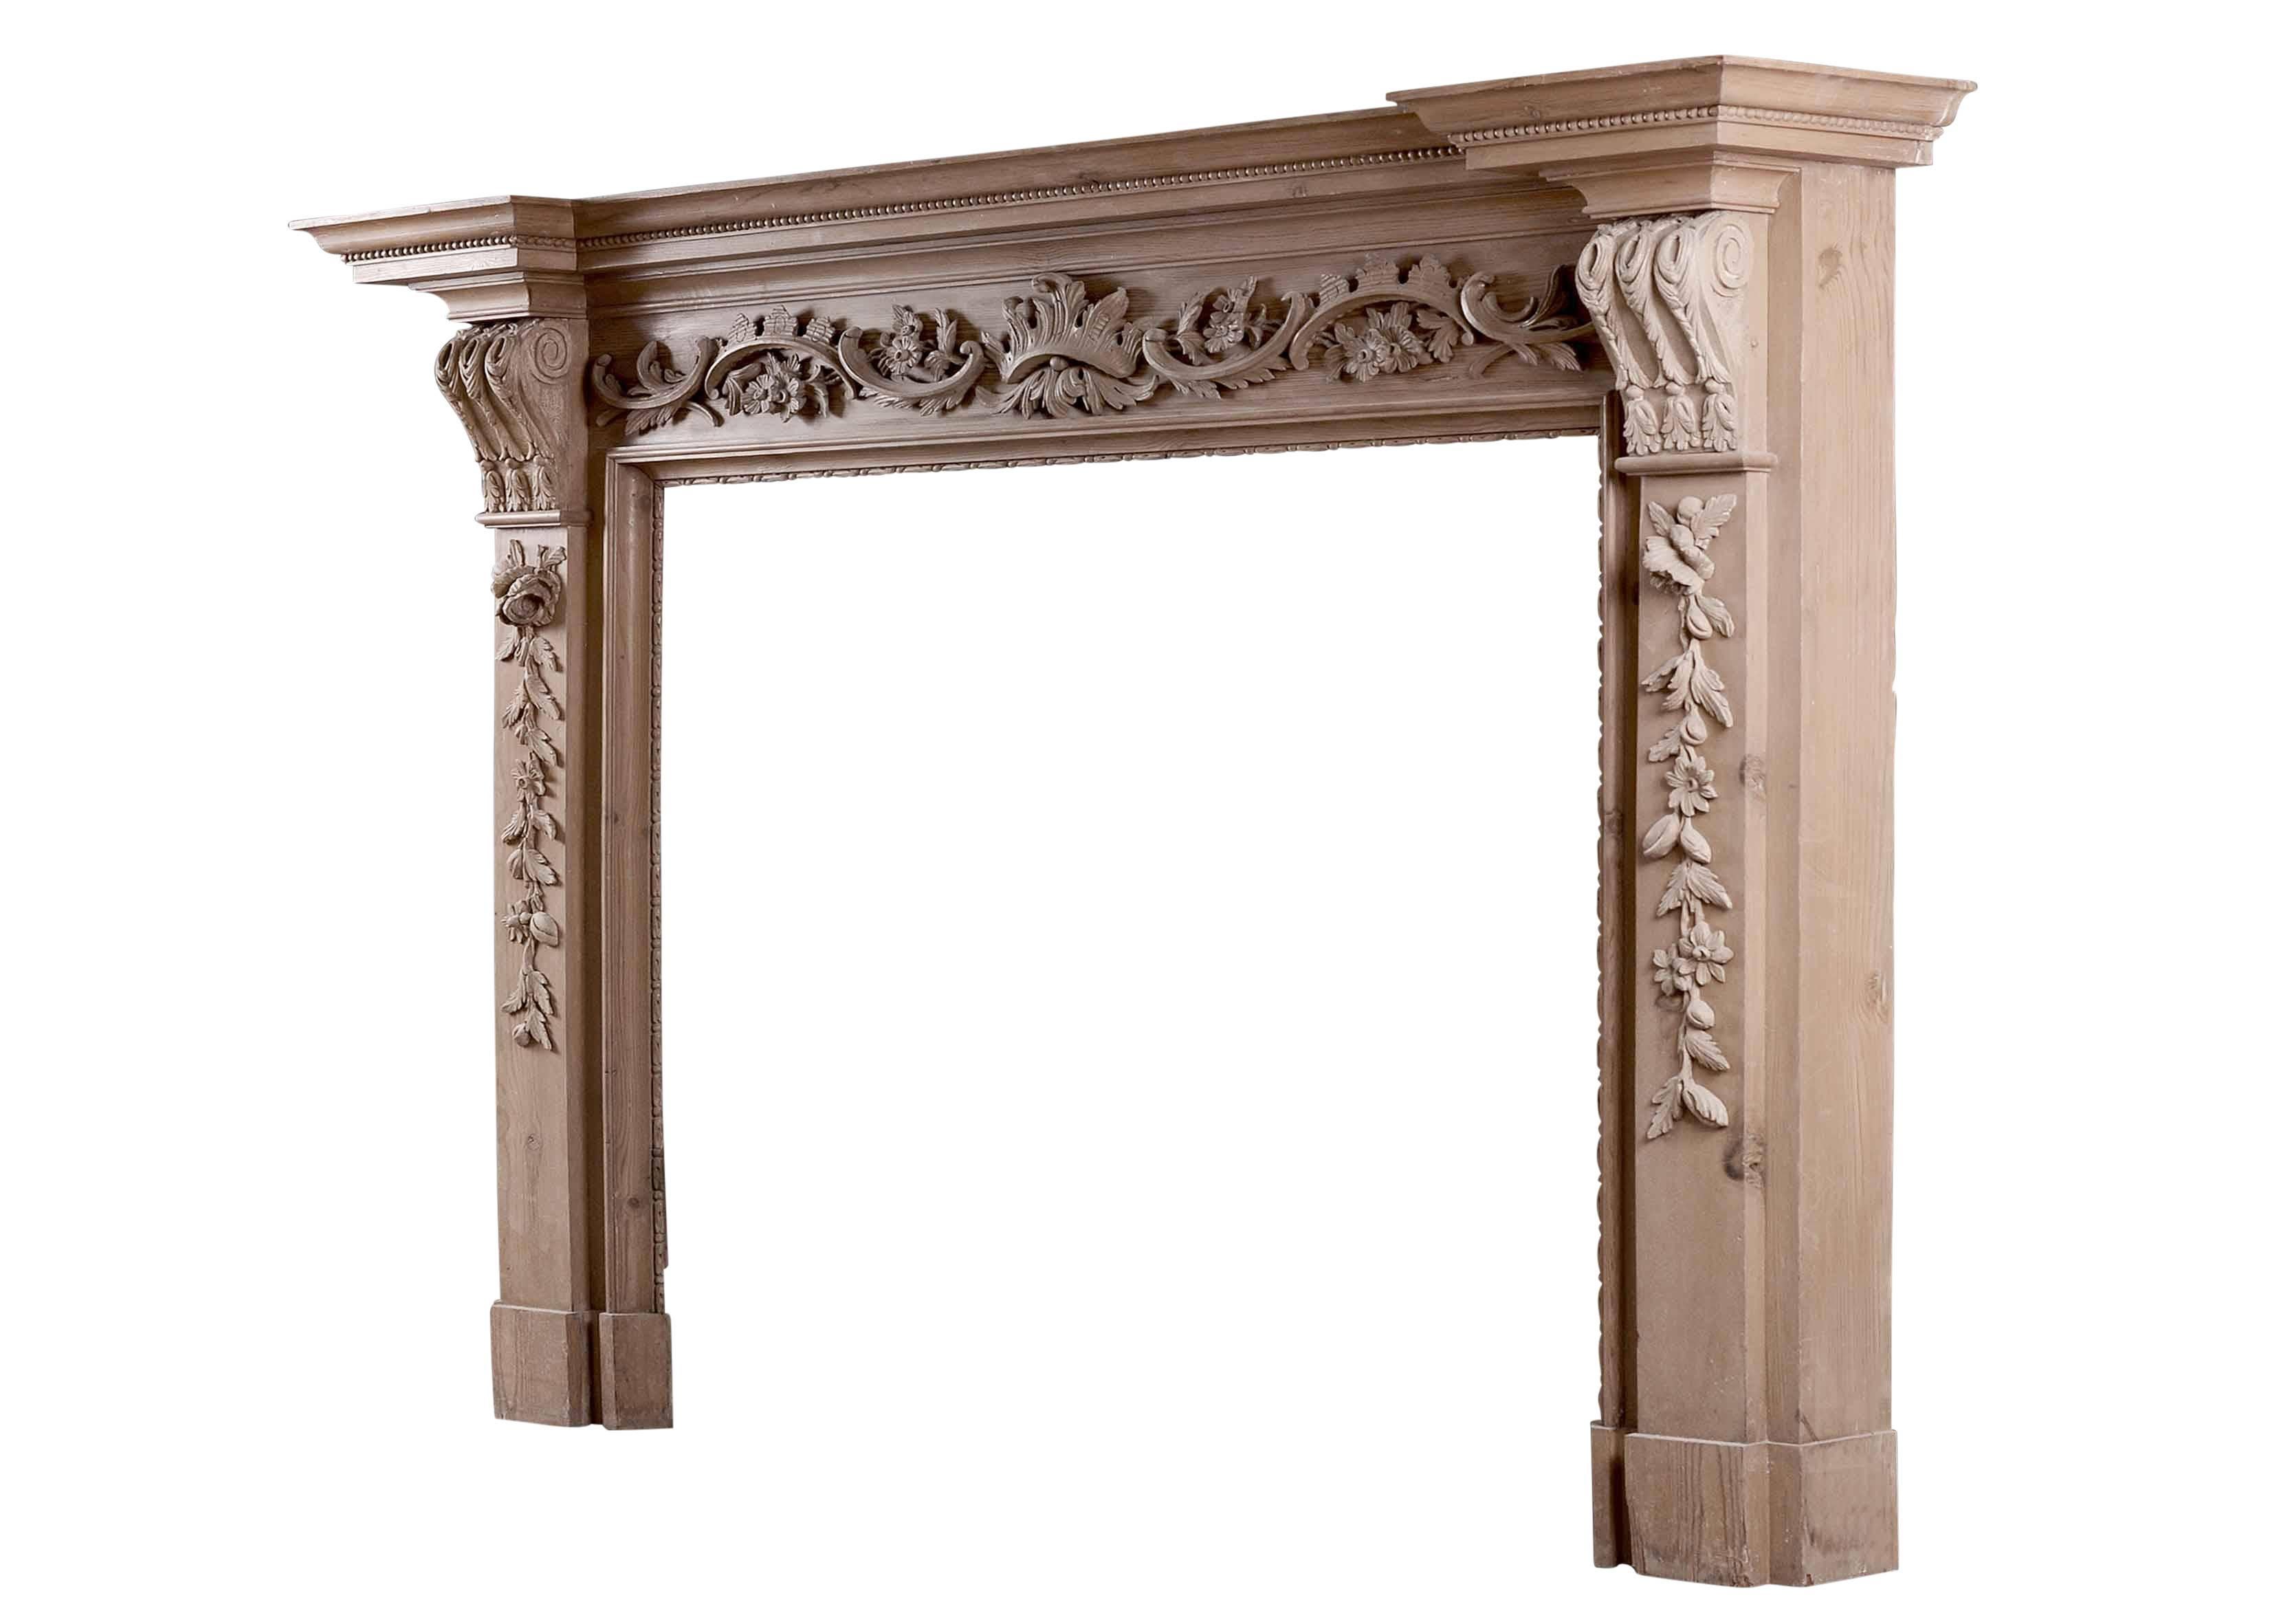 European English Pine Fireplace with Carved Fruit & Foliage For Sale